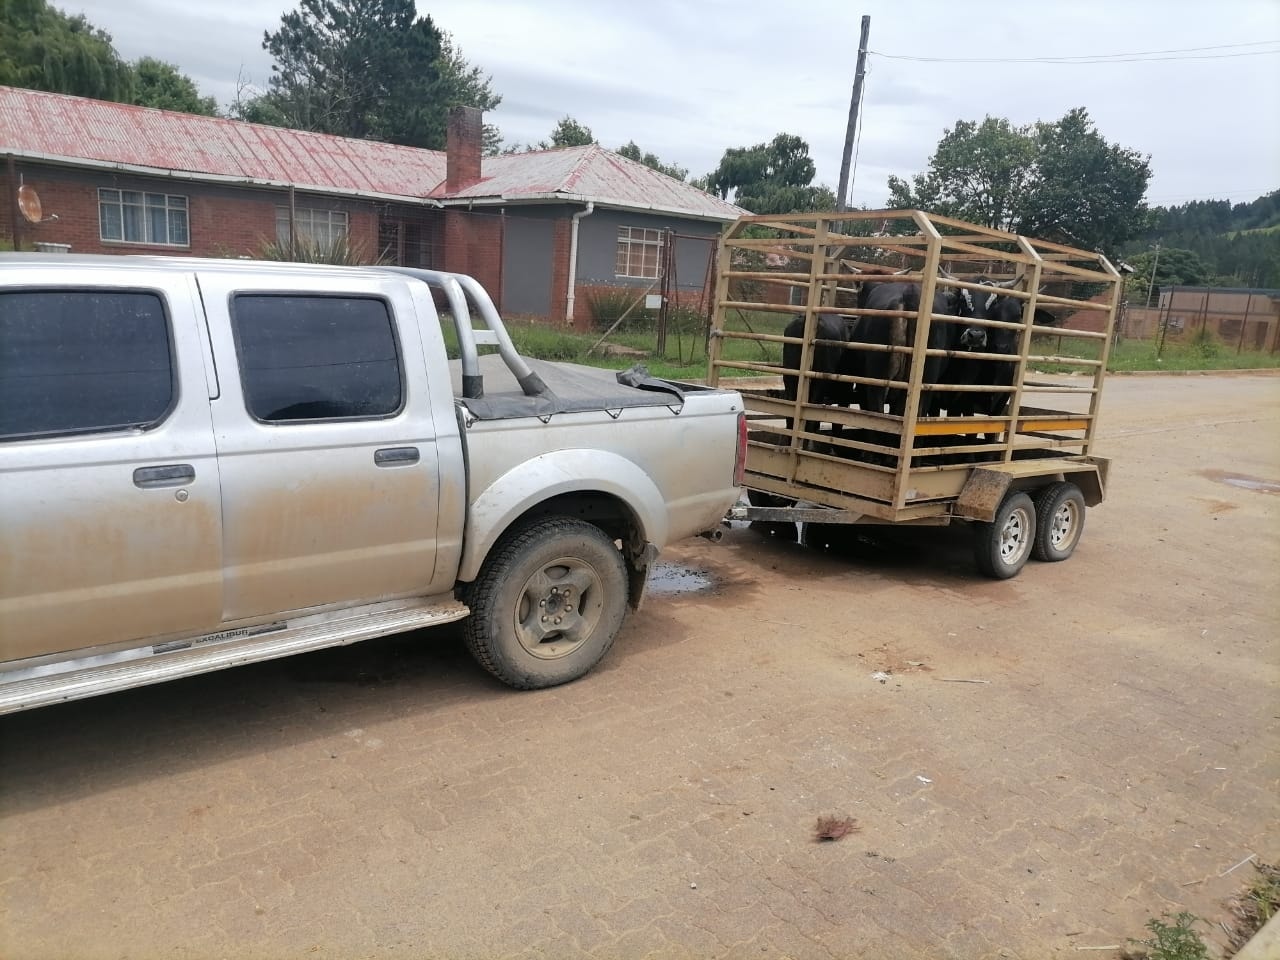 Stolen cattle recovered at home of suspect in the Eshowe area